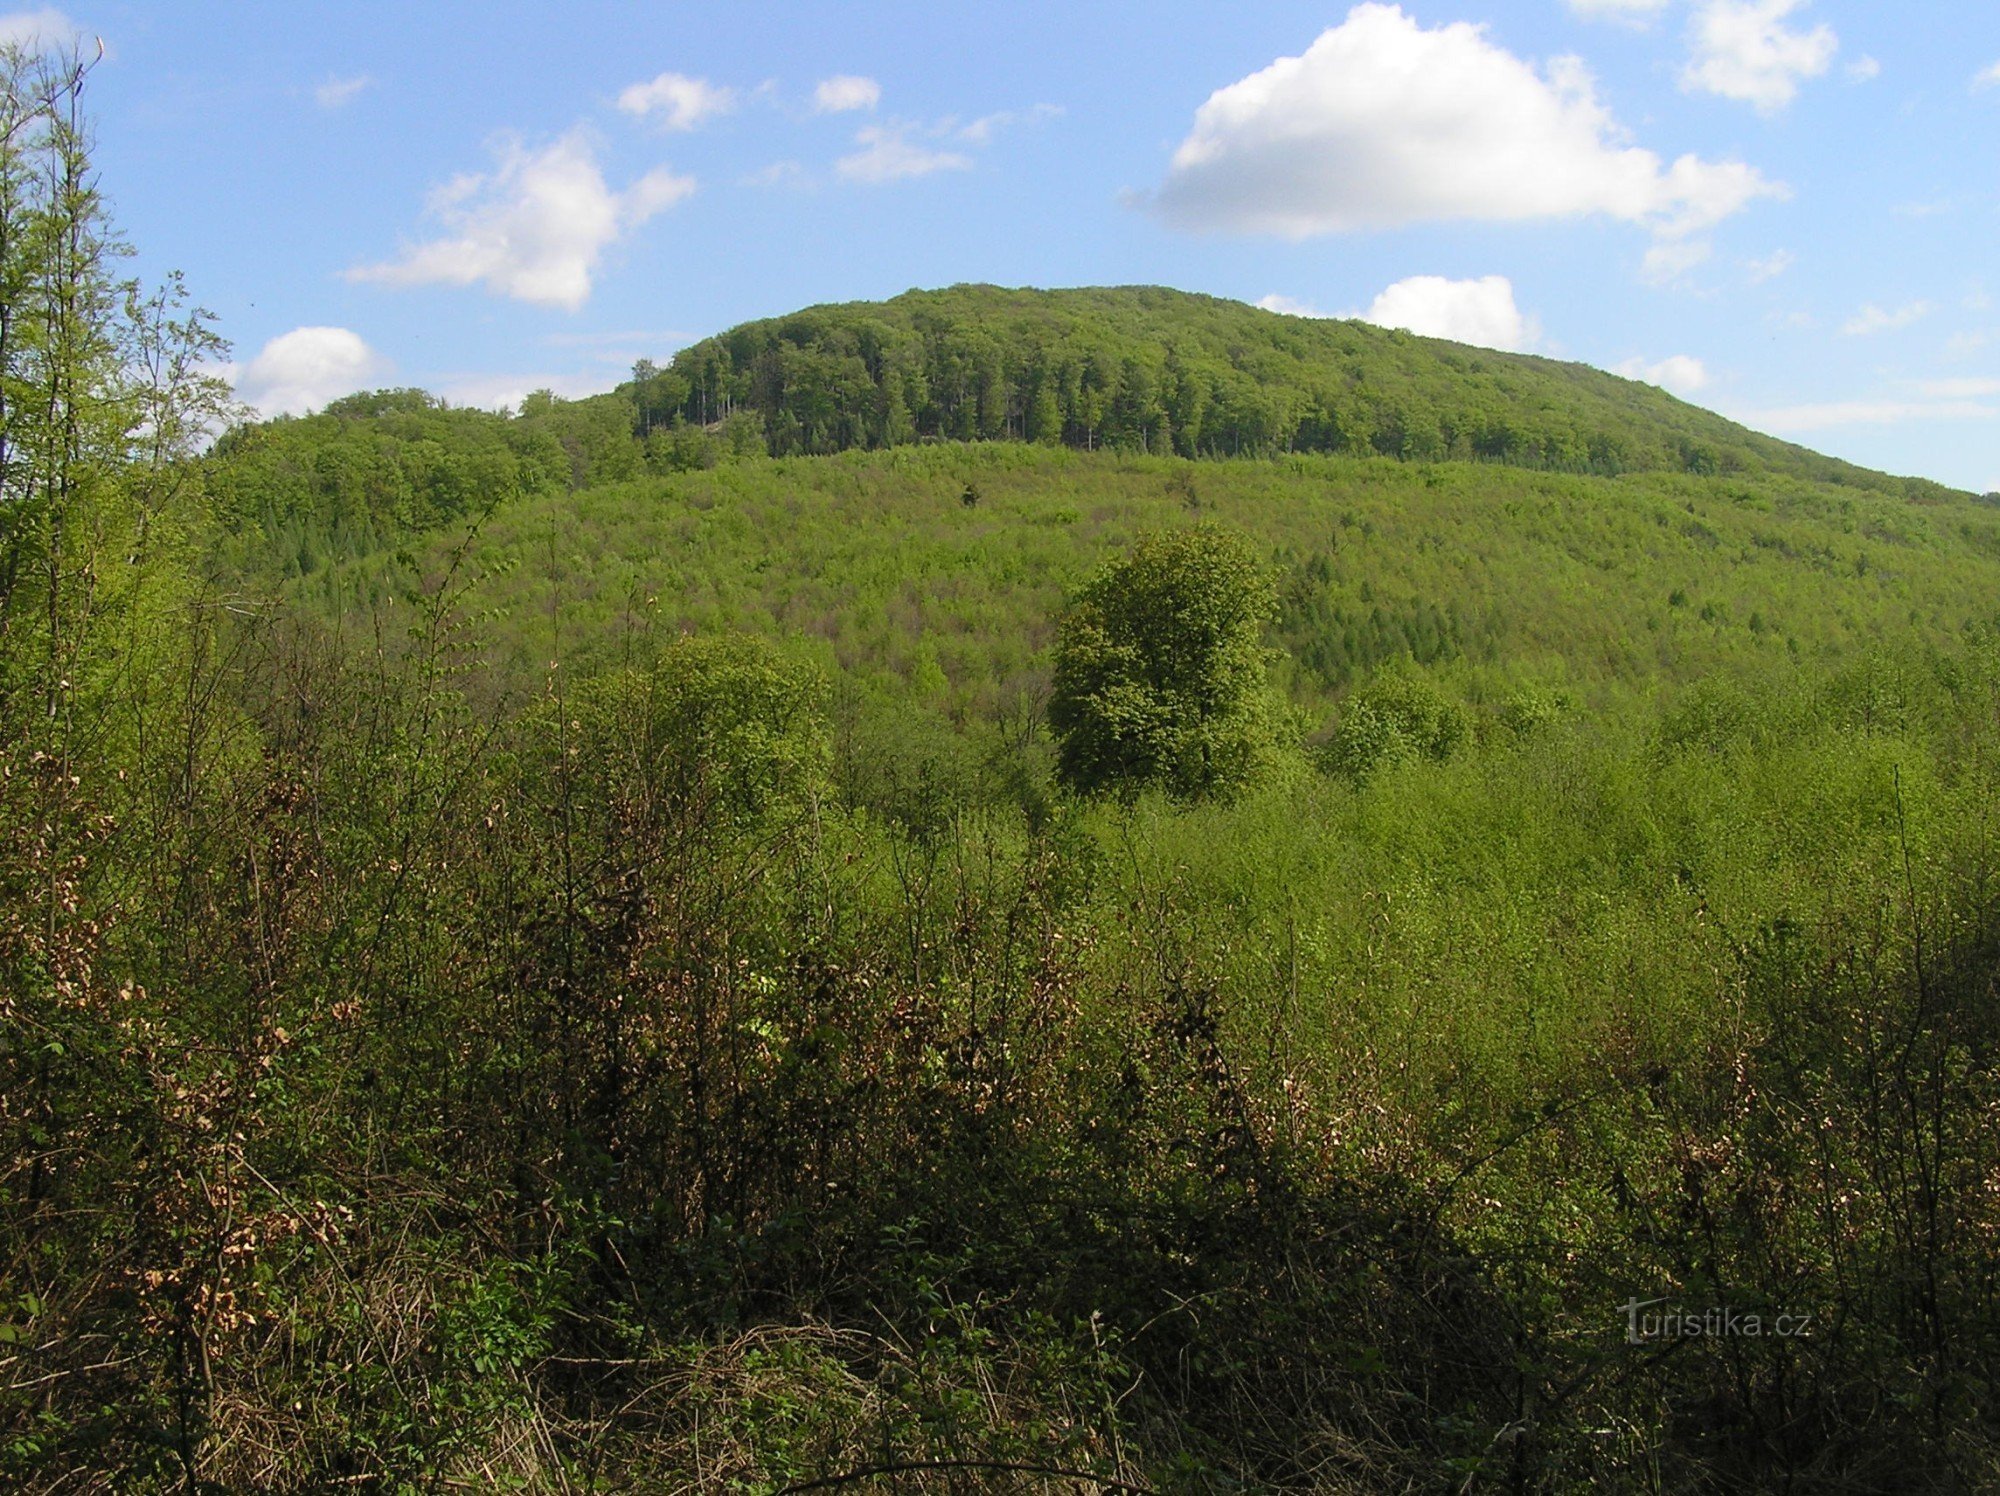 general view of Holý kopec from the southwest - the reserve is occupied by an older forest poro